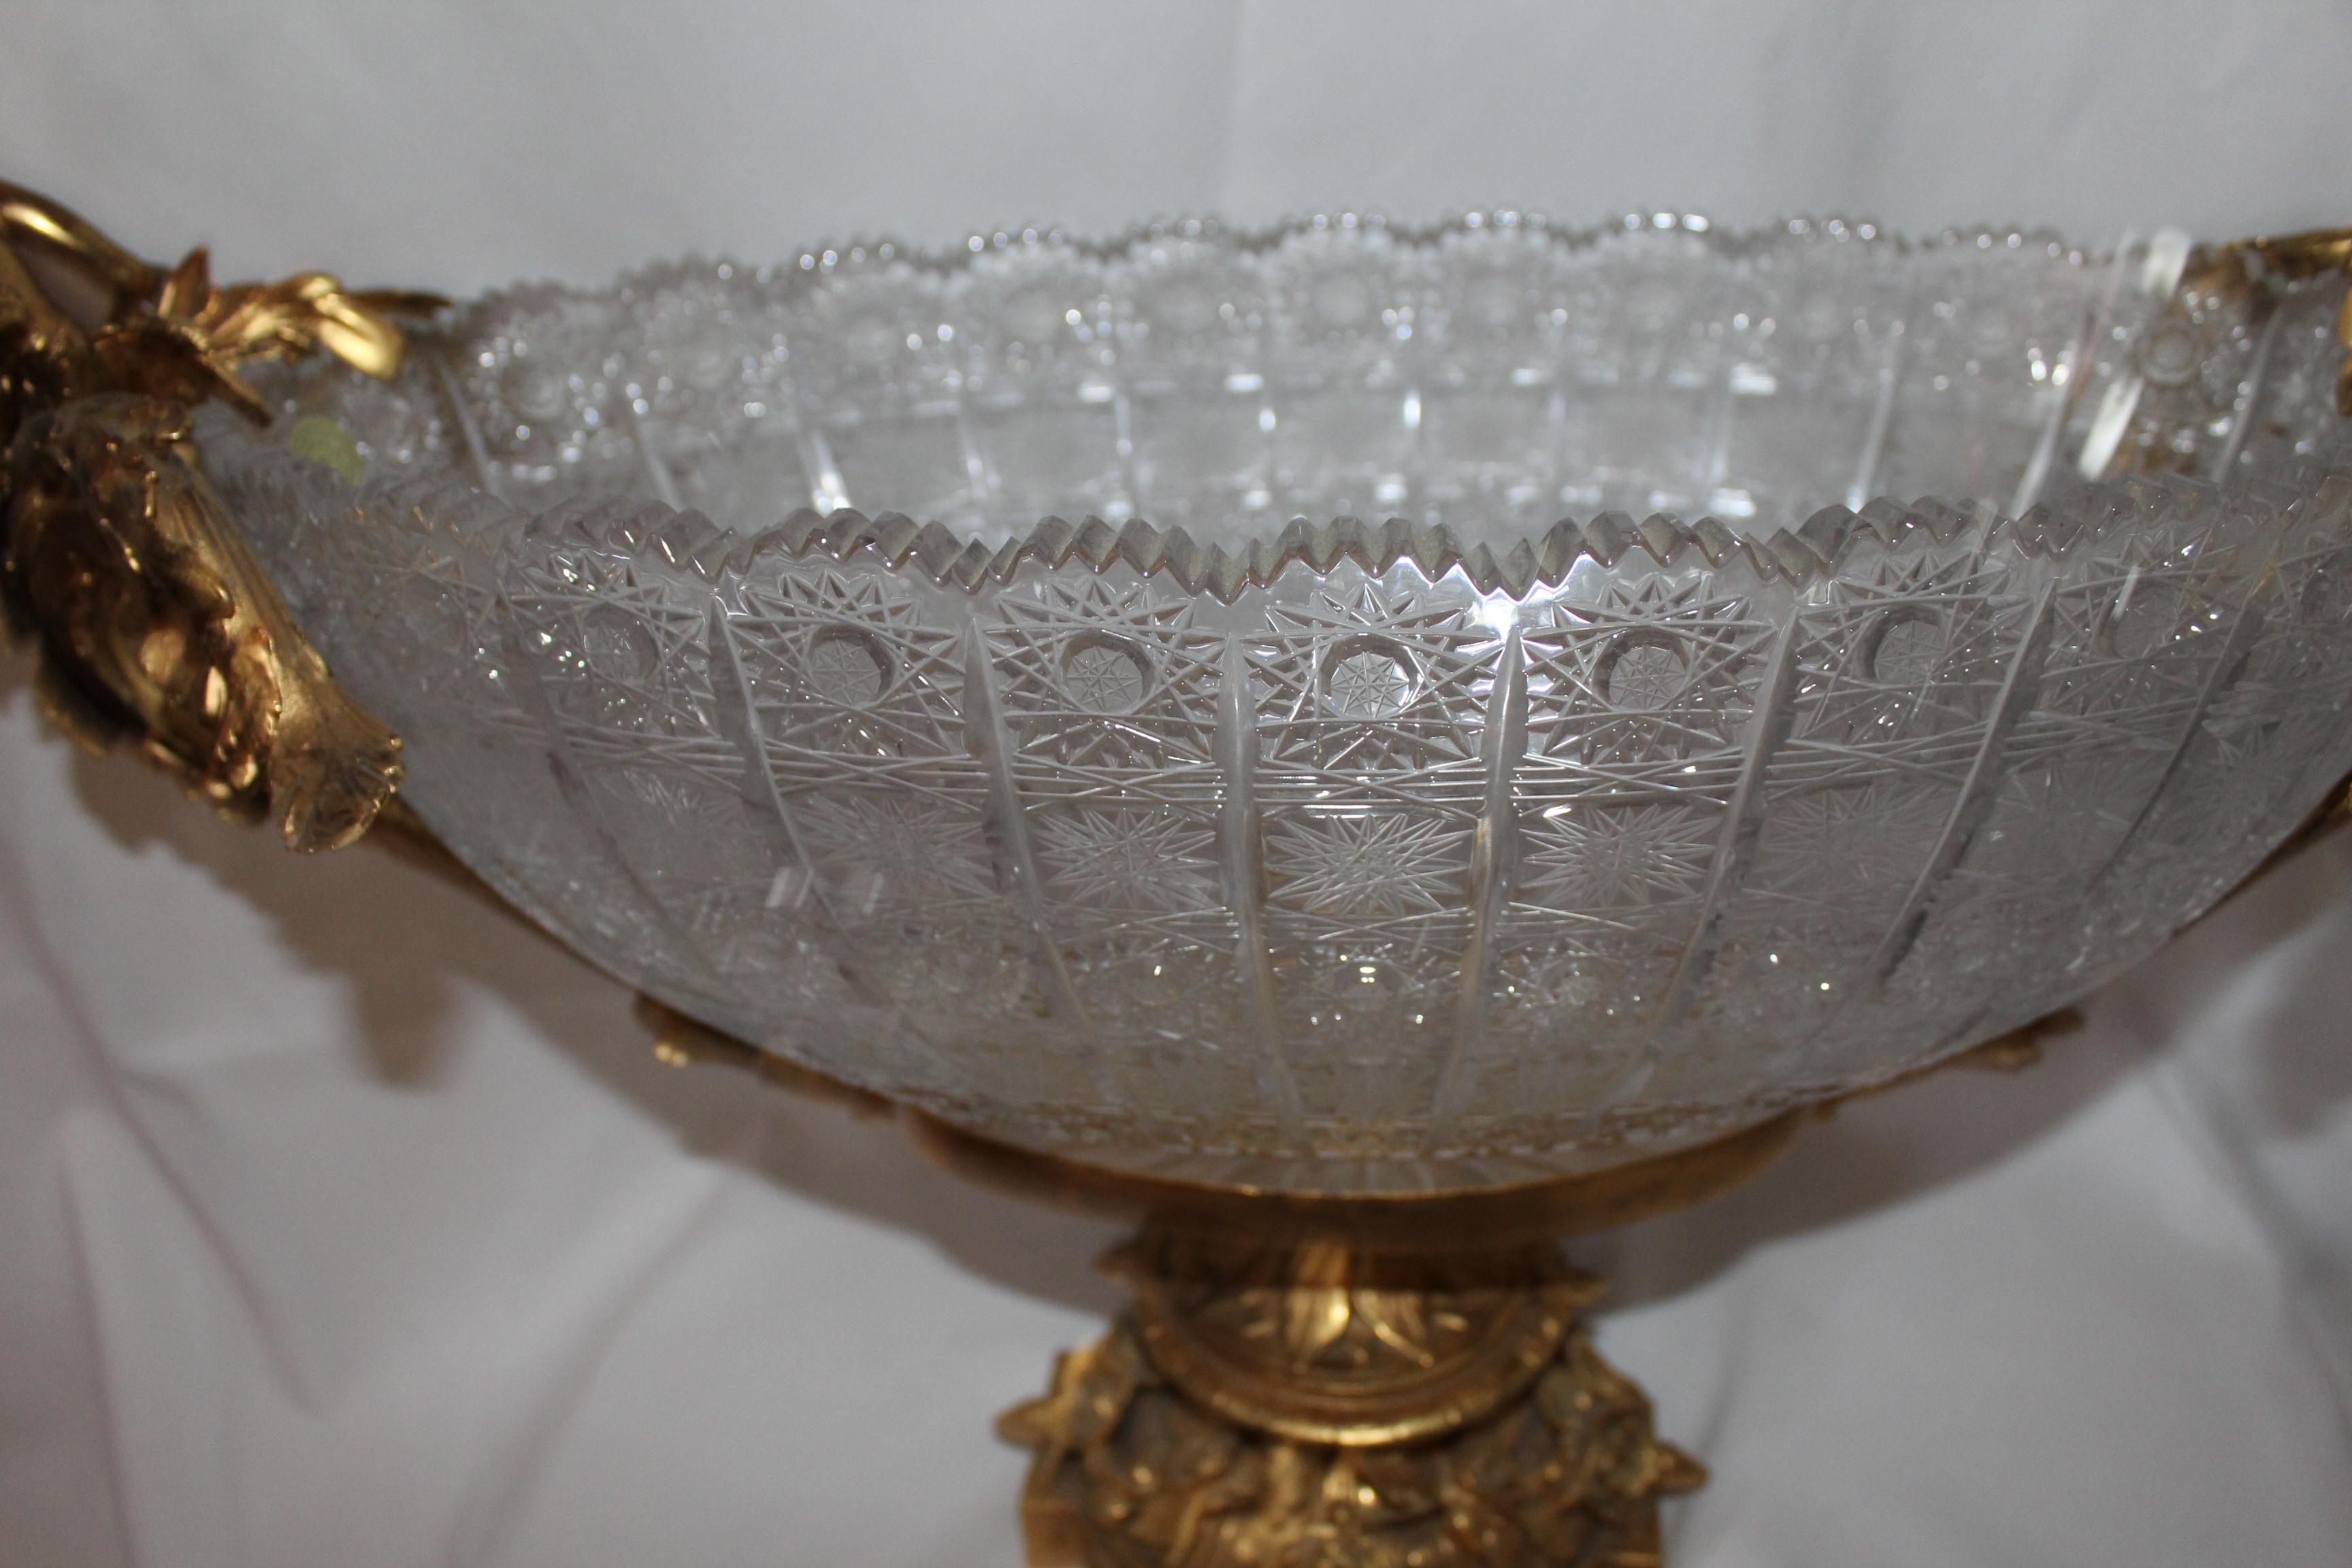 North American 20th Century Empire Contemporary Crystal Bowl Center Piece with Dolphins